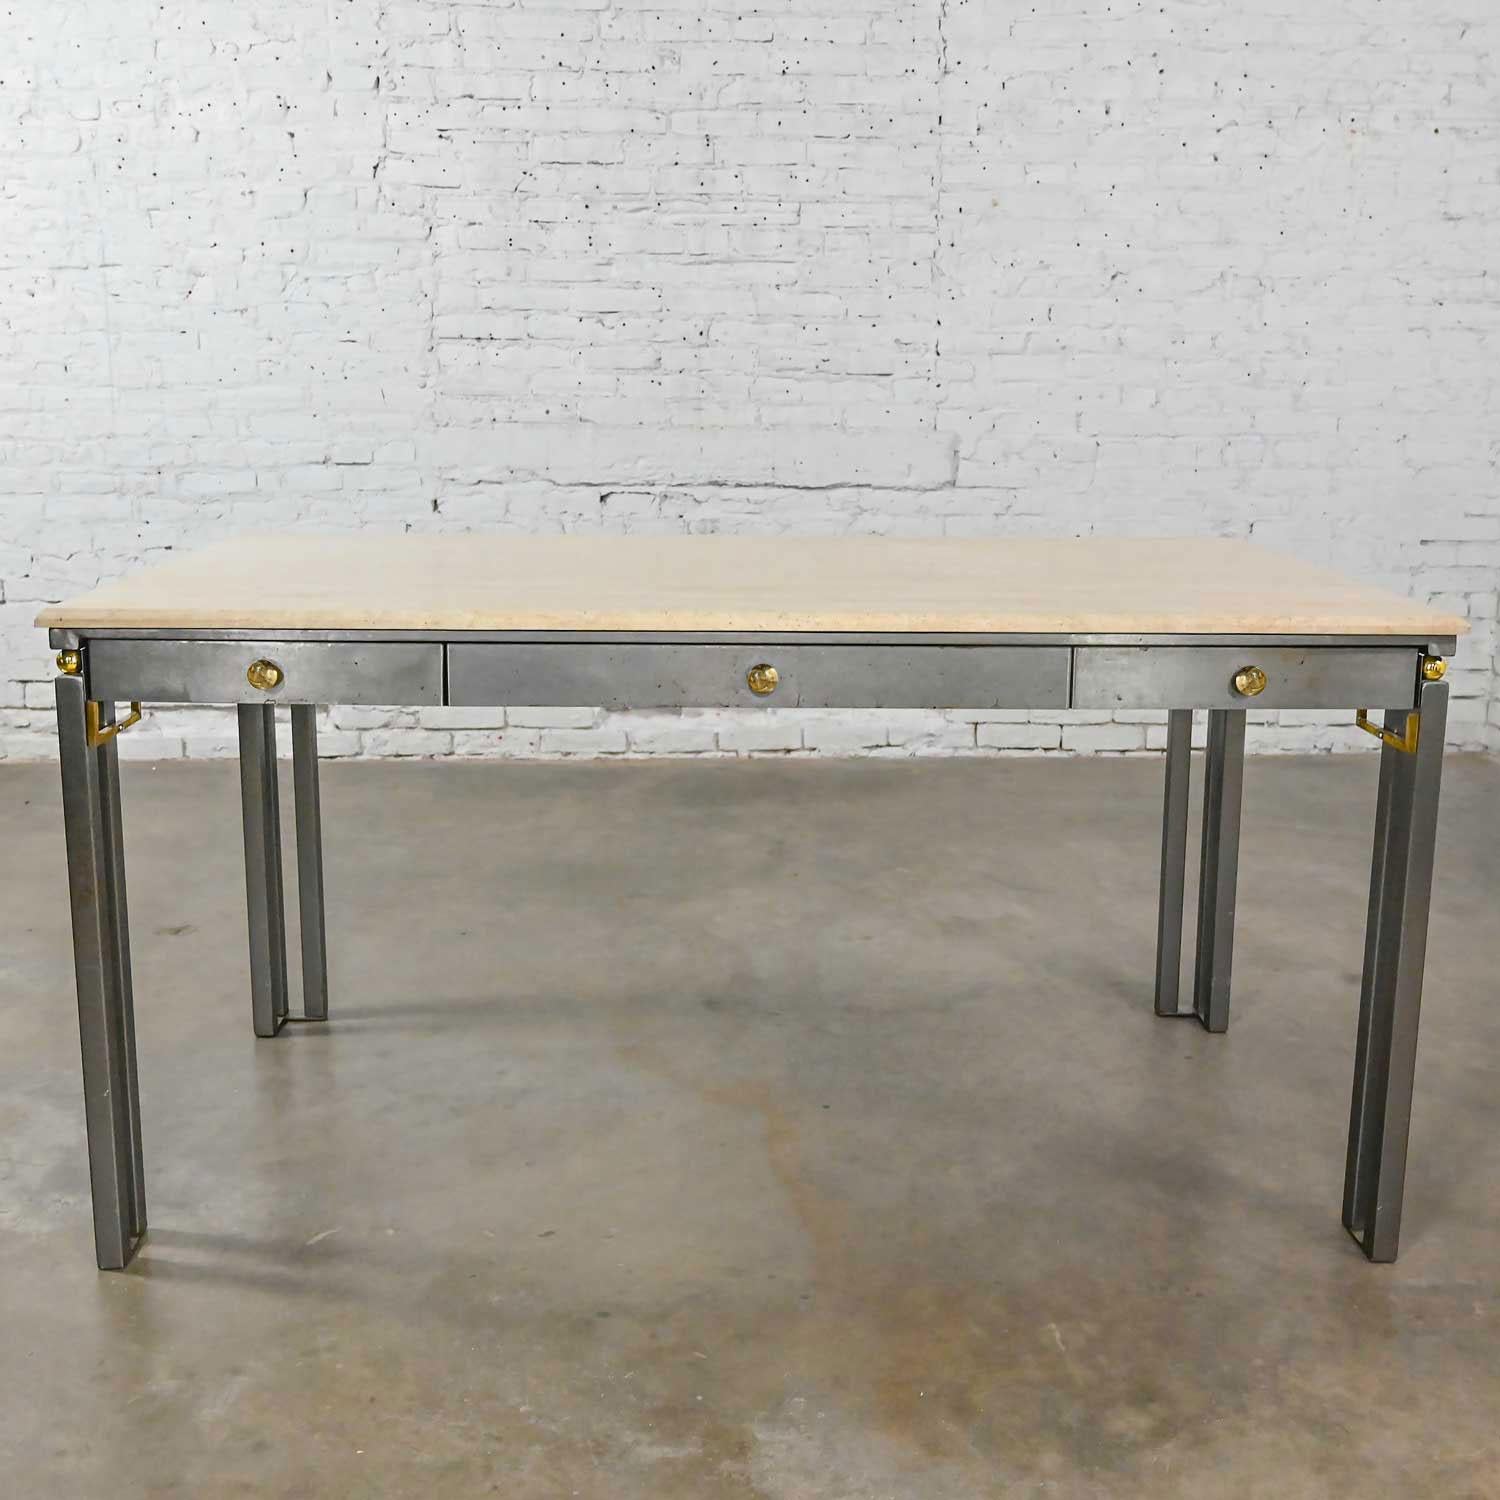 Handsome modern custom-made writing desk by Jensen Design Inc comprised of a square steel tube base with natural steel finish, 3 drawers, brass plated sphere details, solid brass corner detail, and a travertine tabletop with natural filled and honed